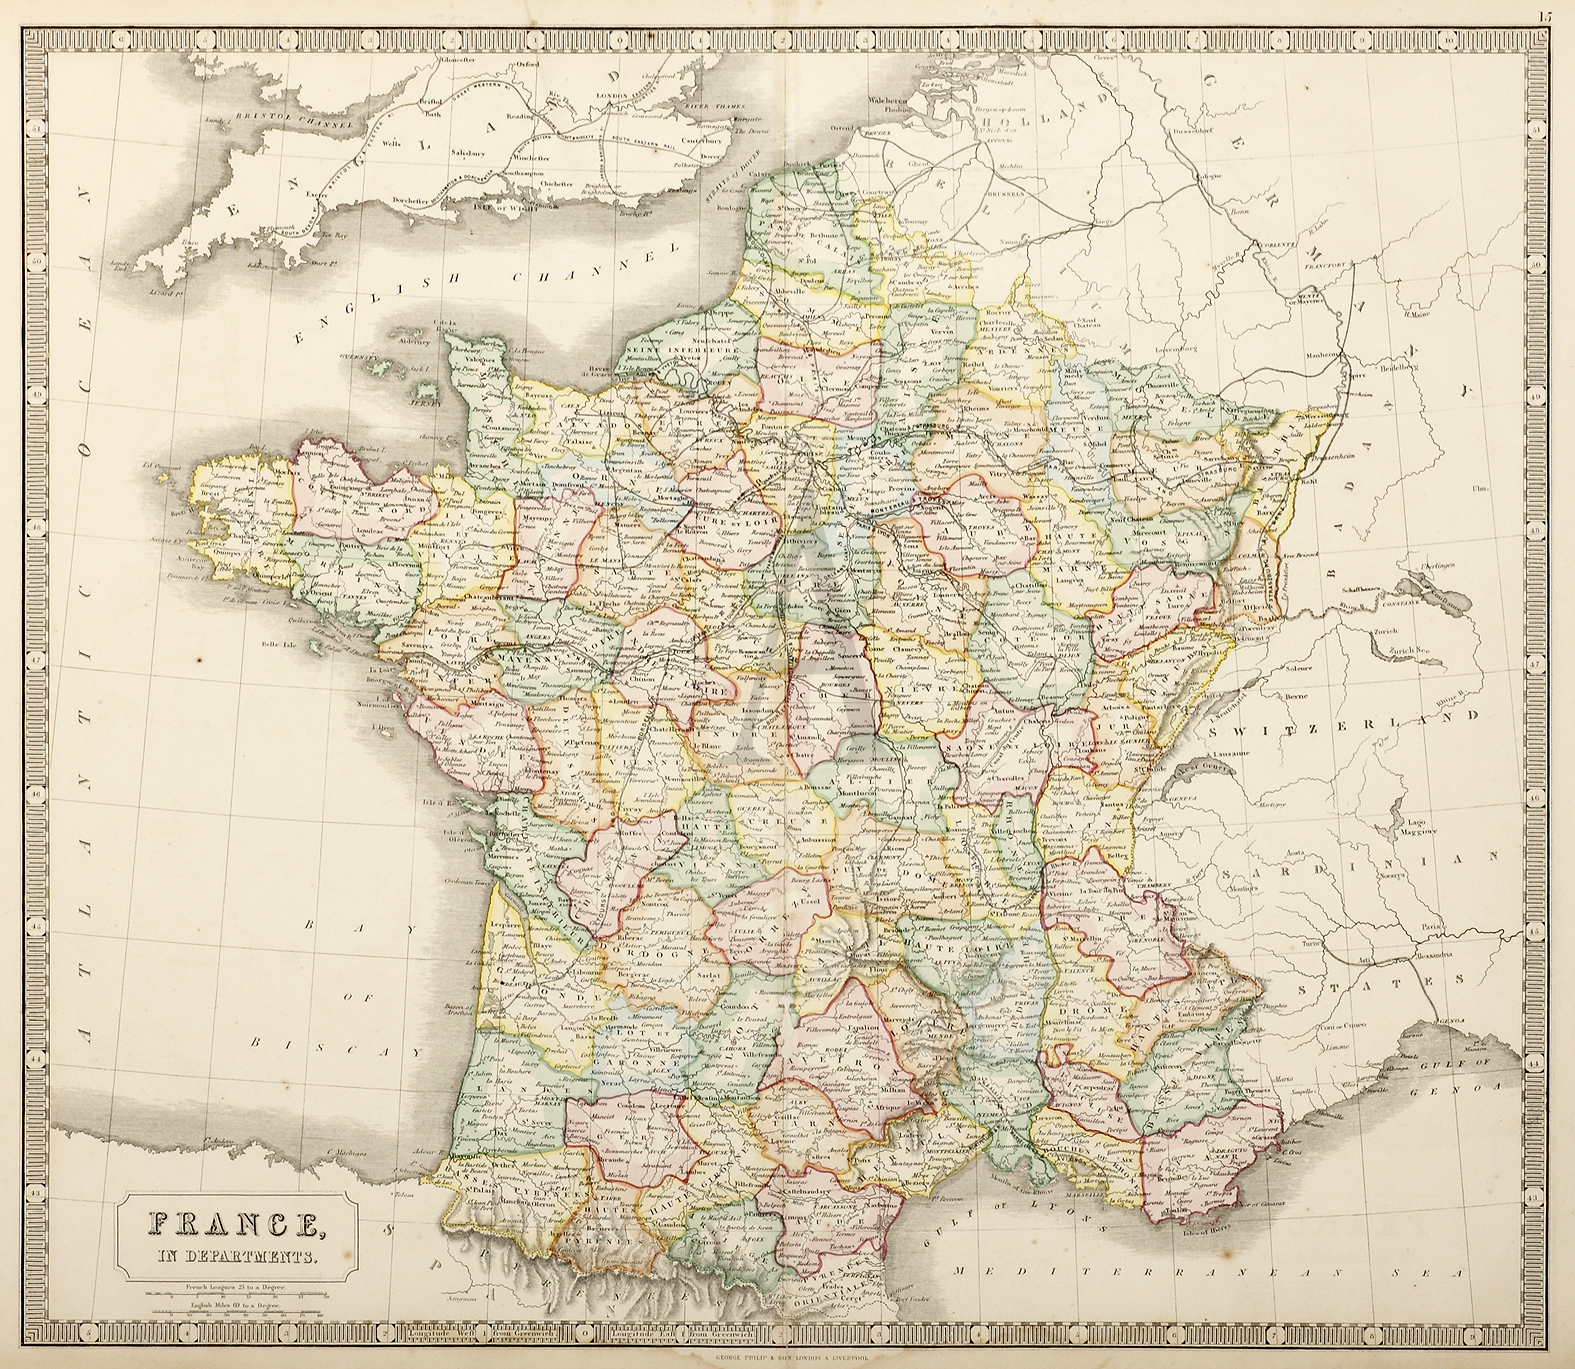 France, in Departments. - Antique Print from 1860